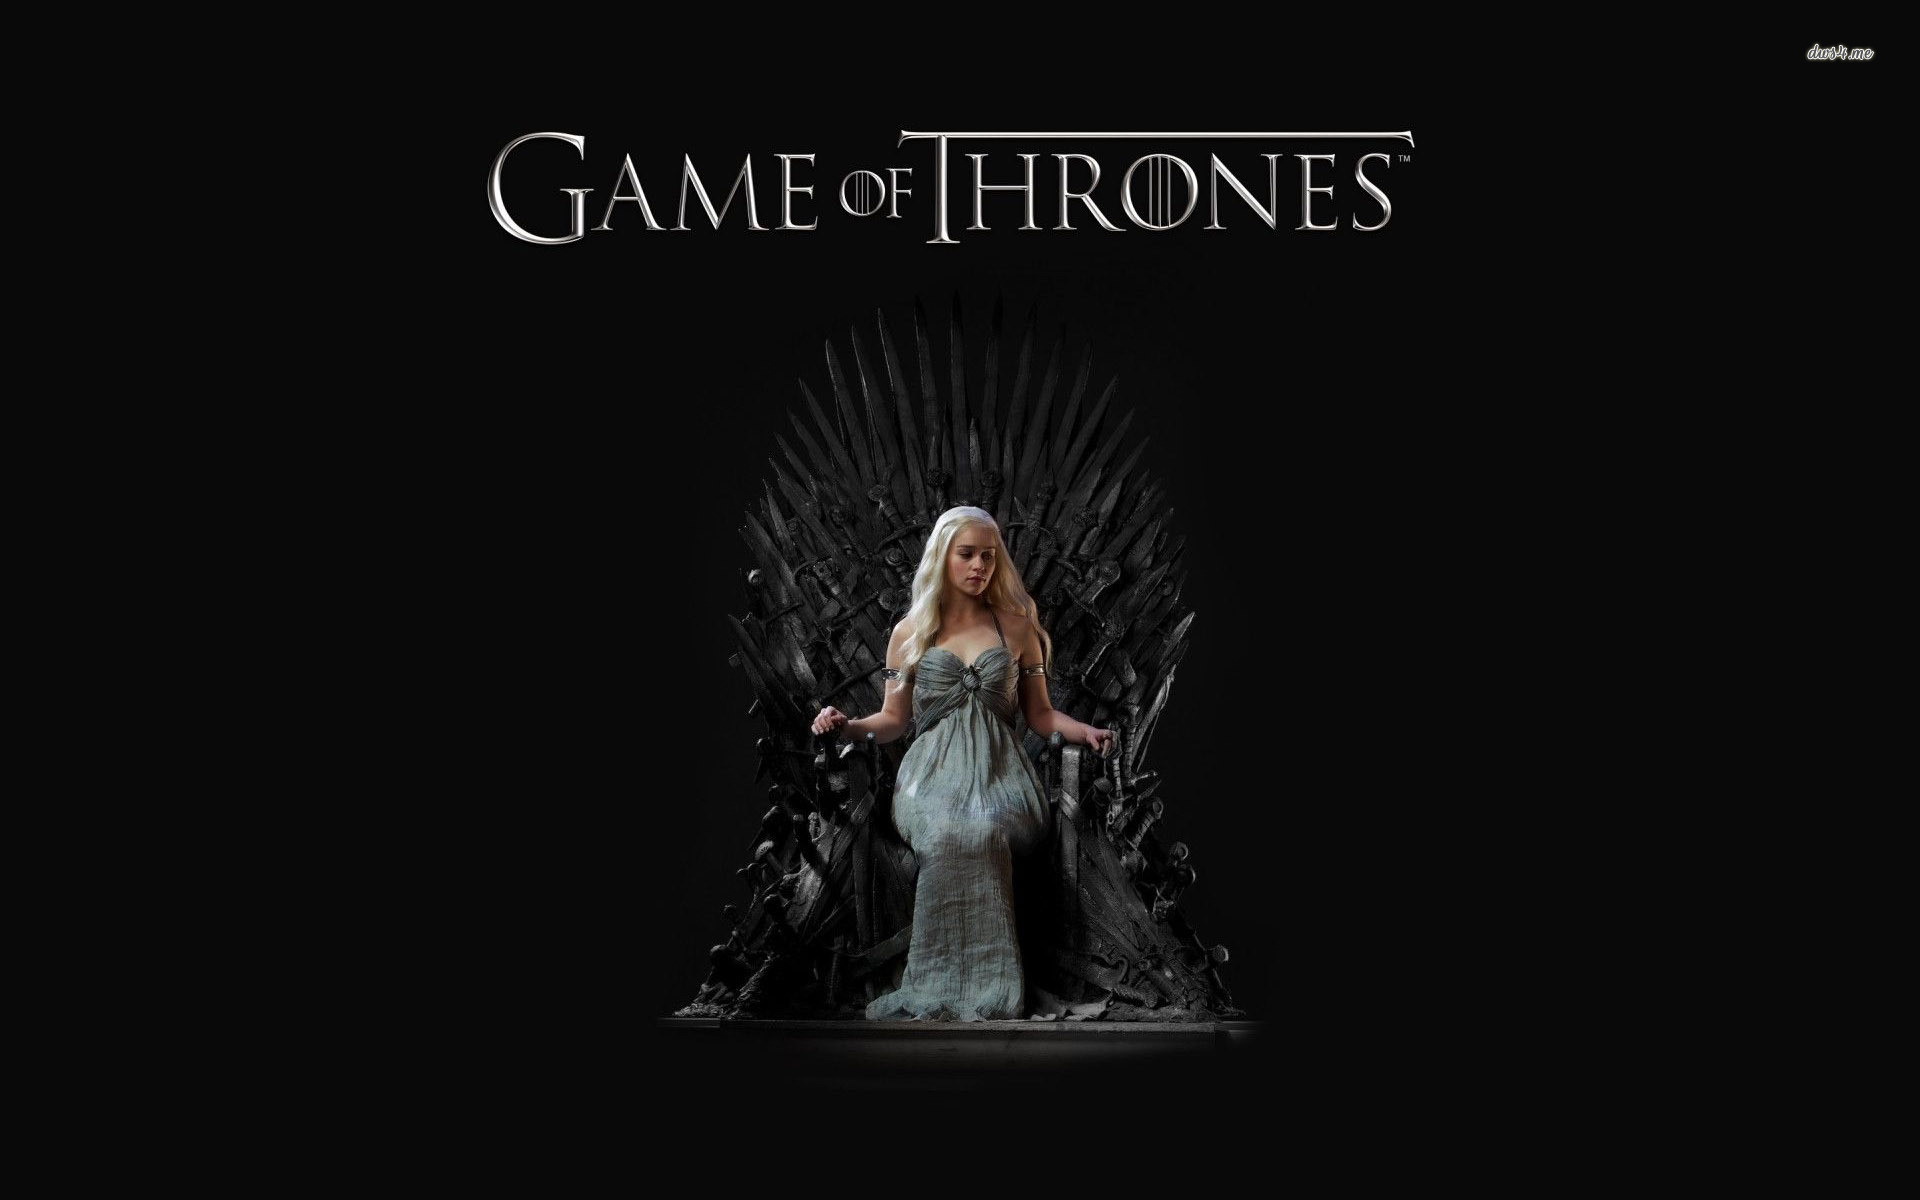 ben maisel recommends game of thrones 1080p pic